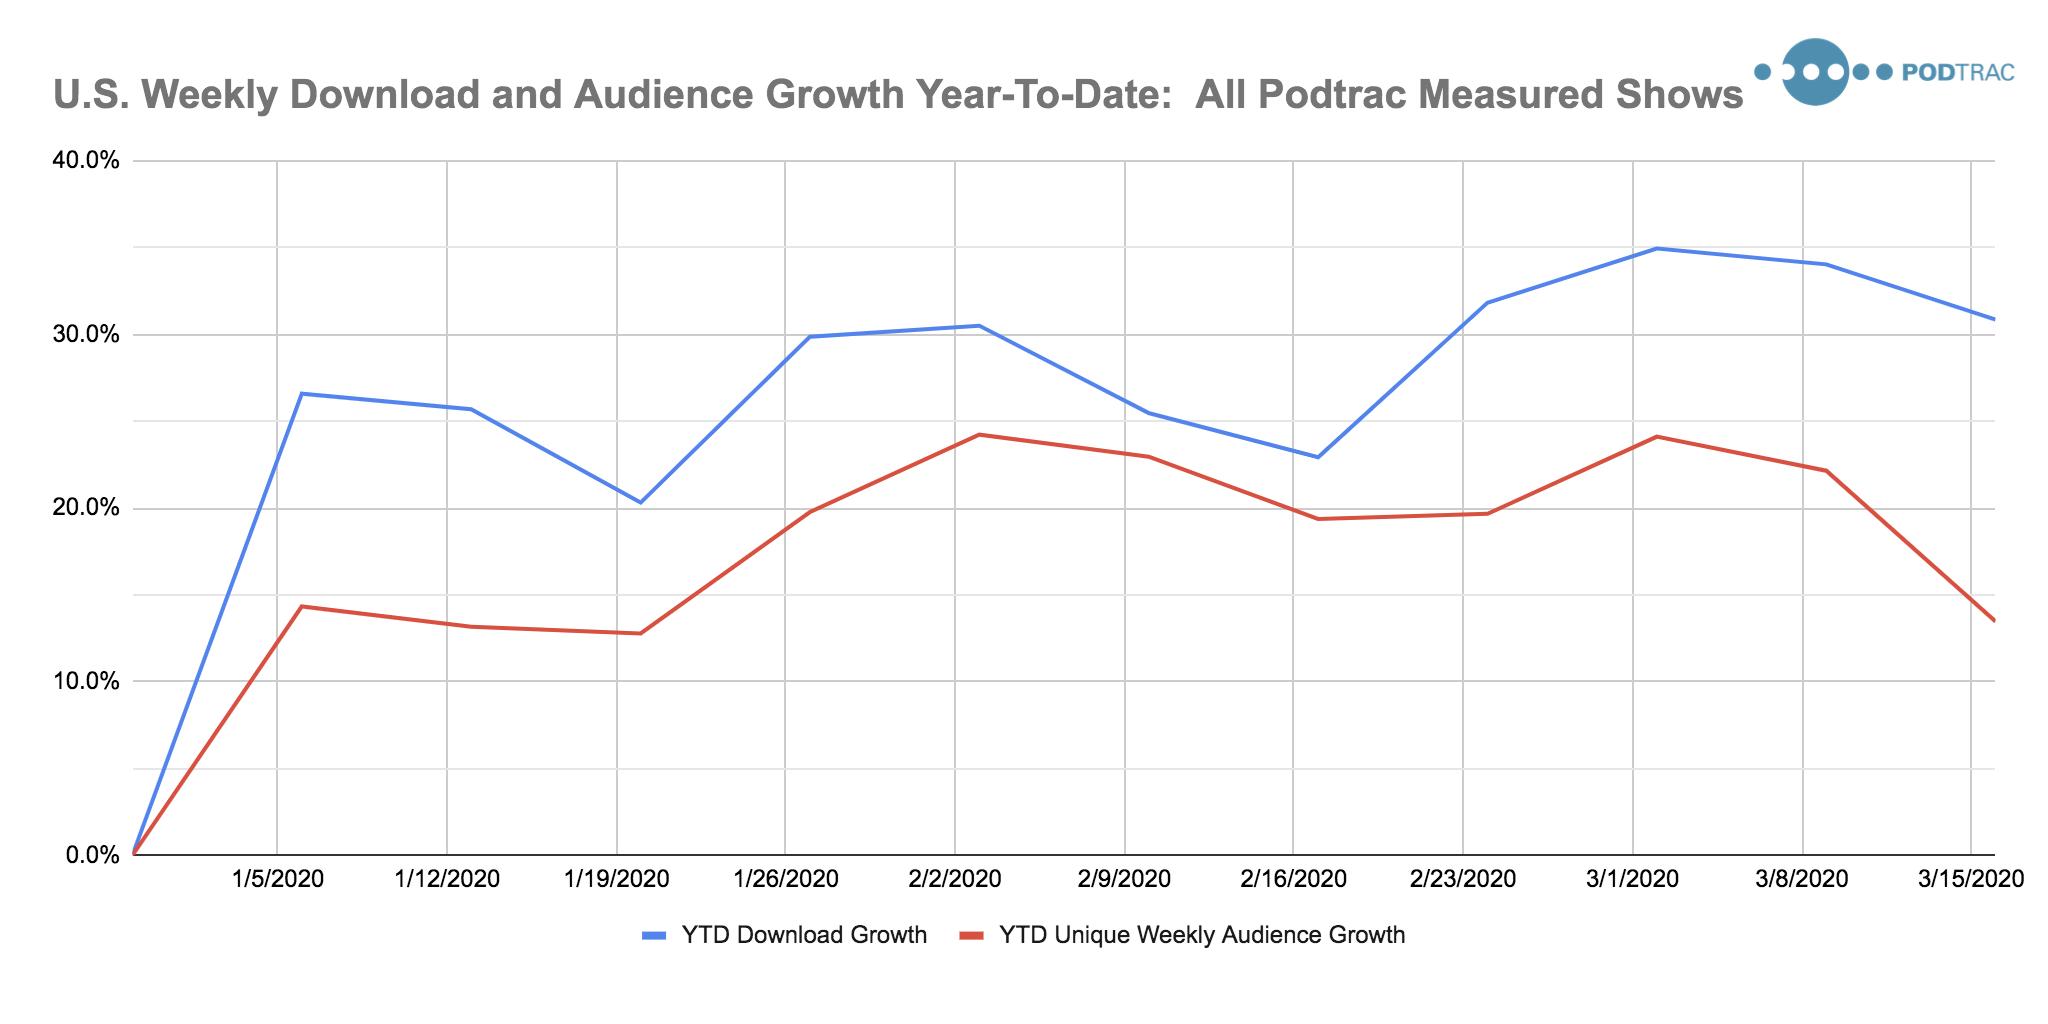 Year-To-Date U.S. Weekly Podcast Download and Audience Growth